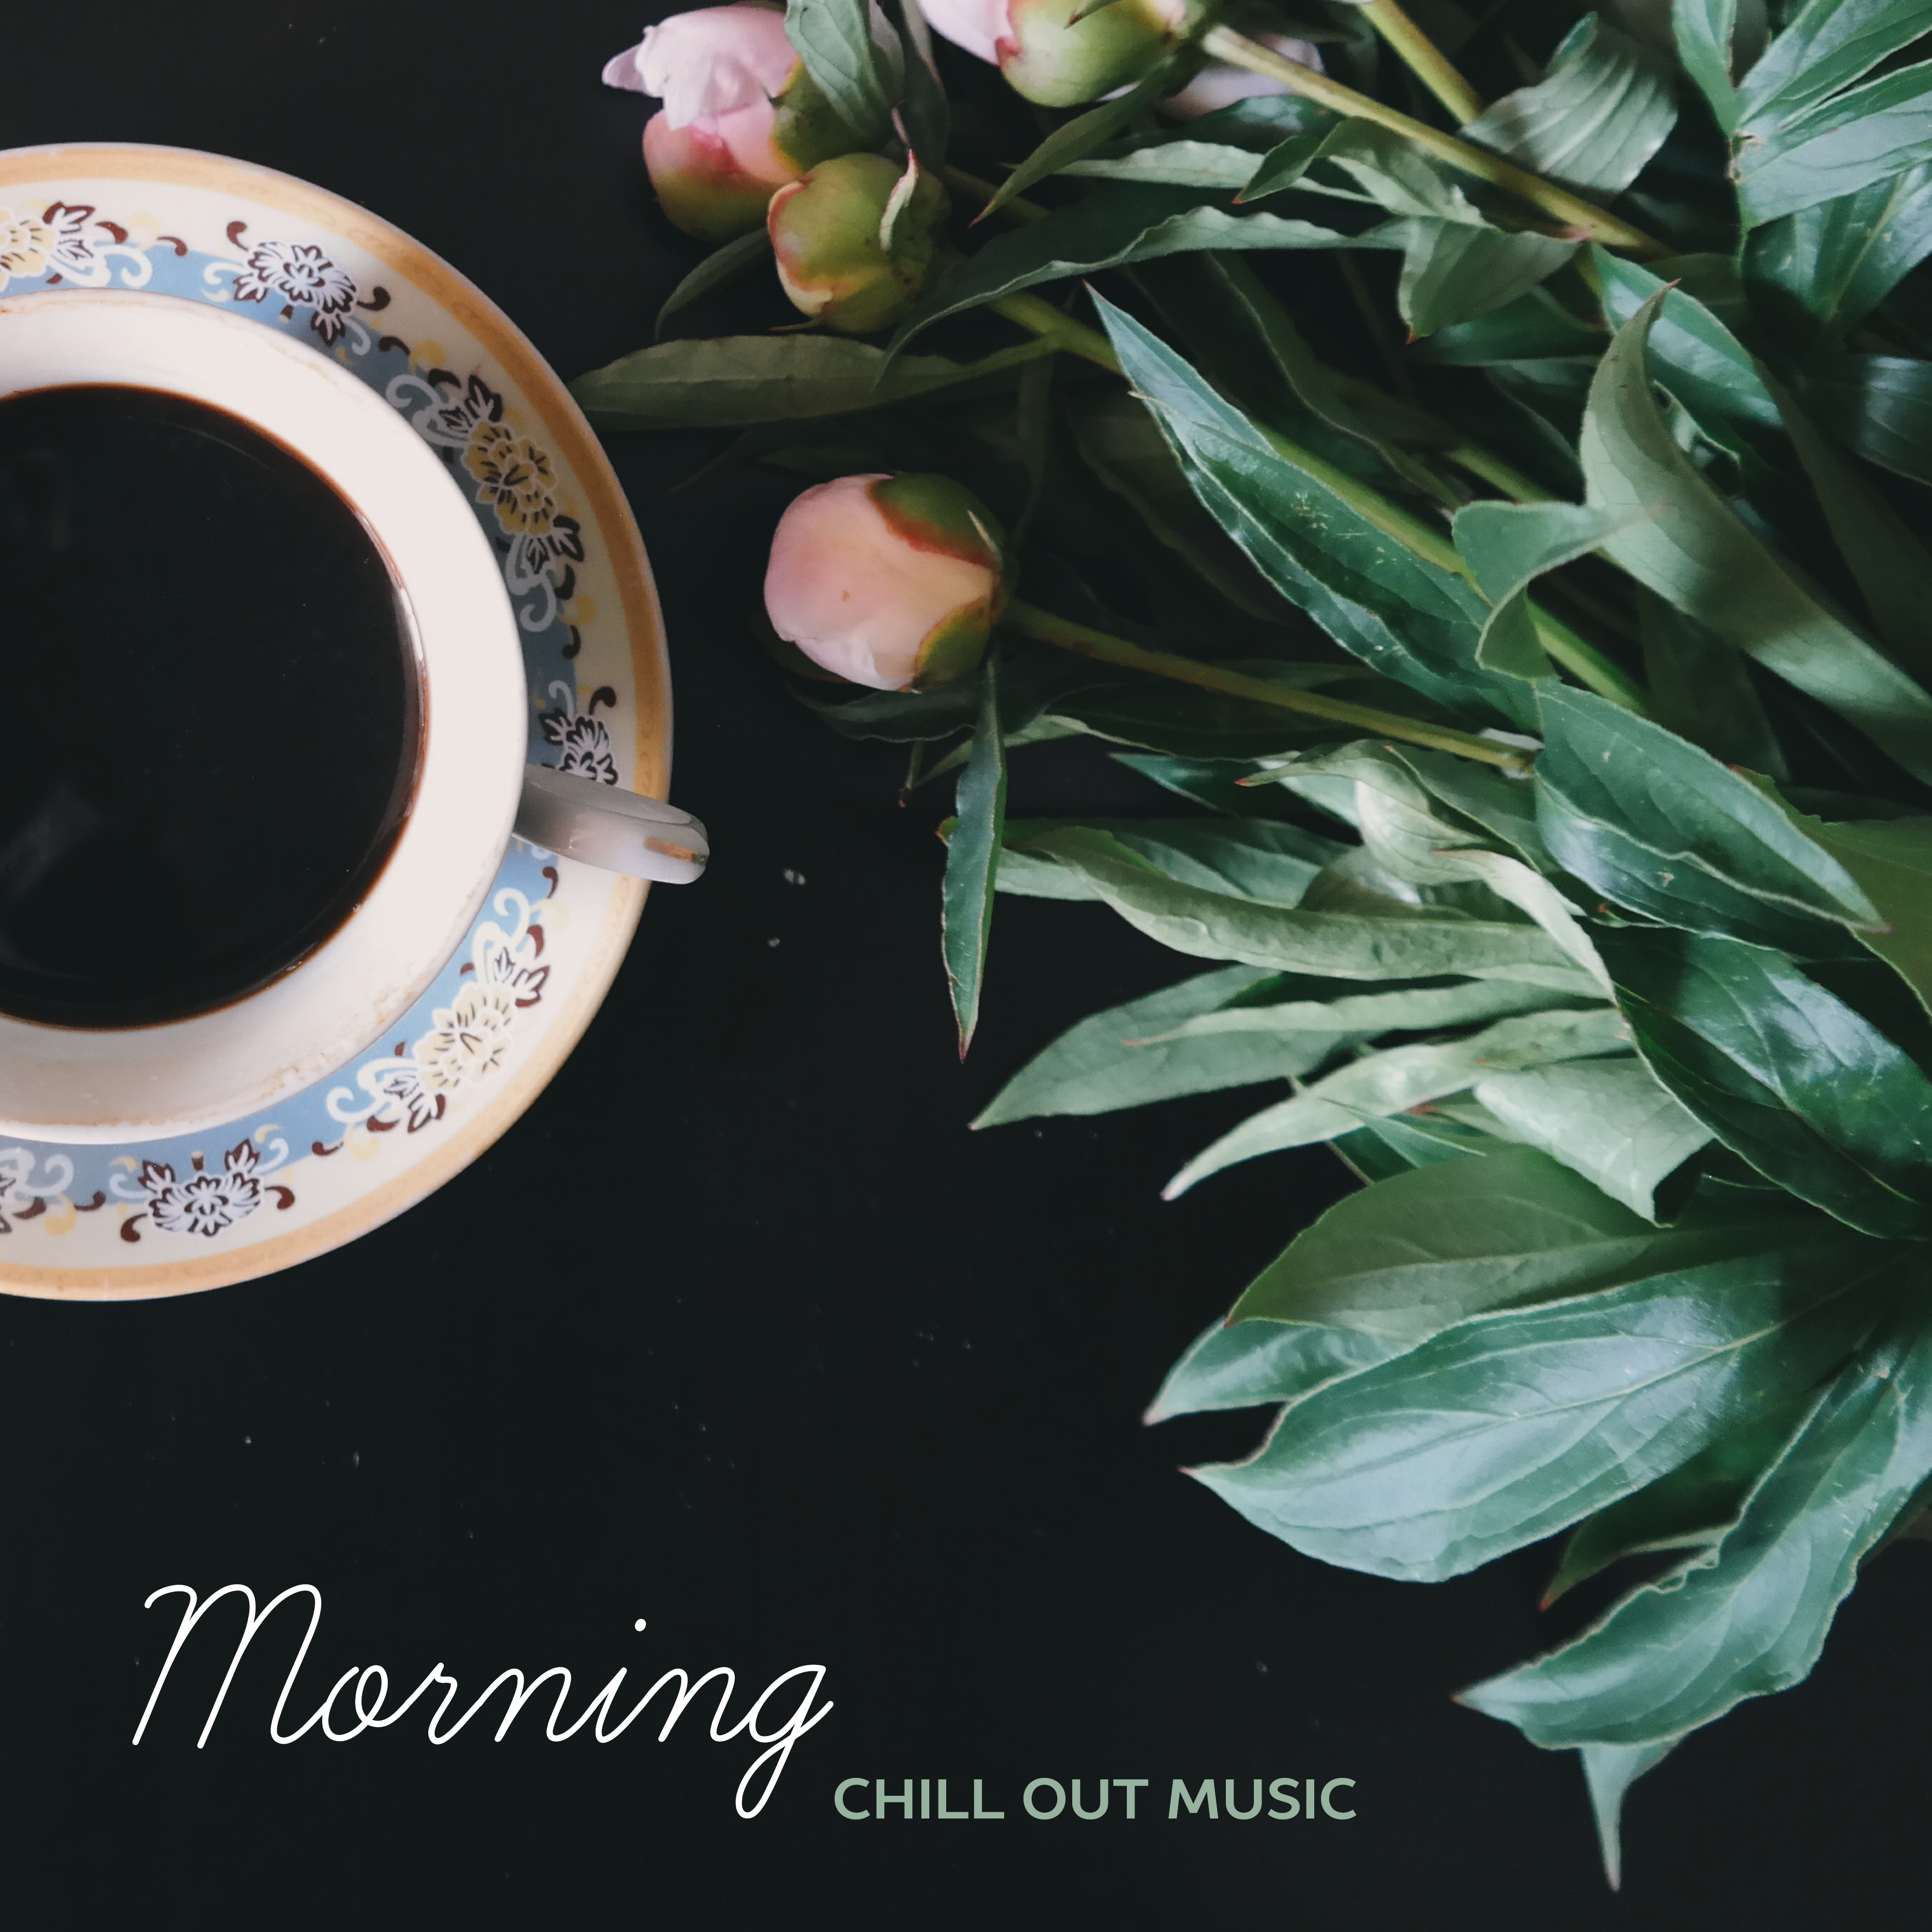 Morning Chill Out Music – Soft Sounds to Relax, Easy Listening, Morning Breeze